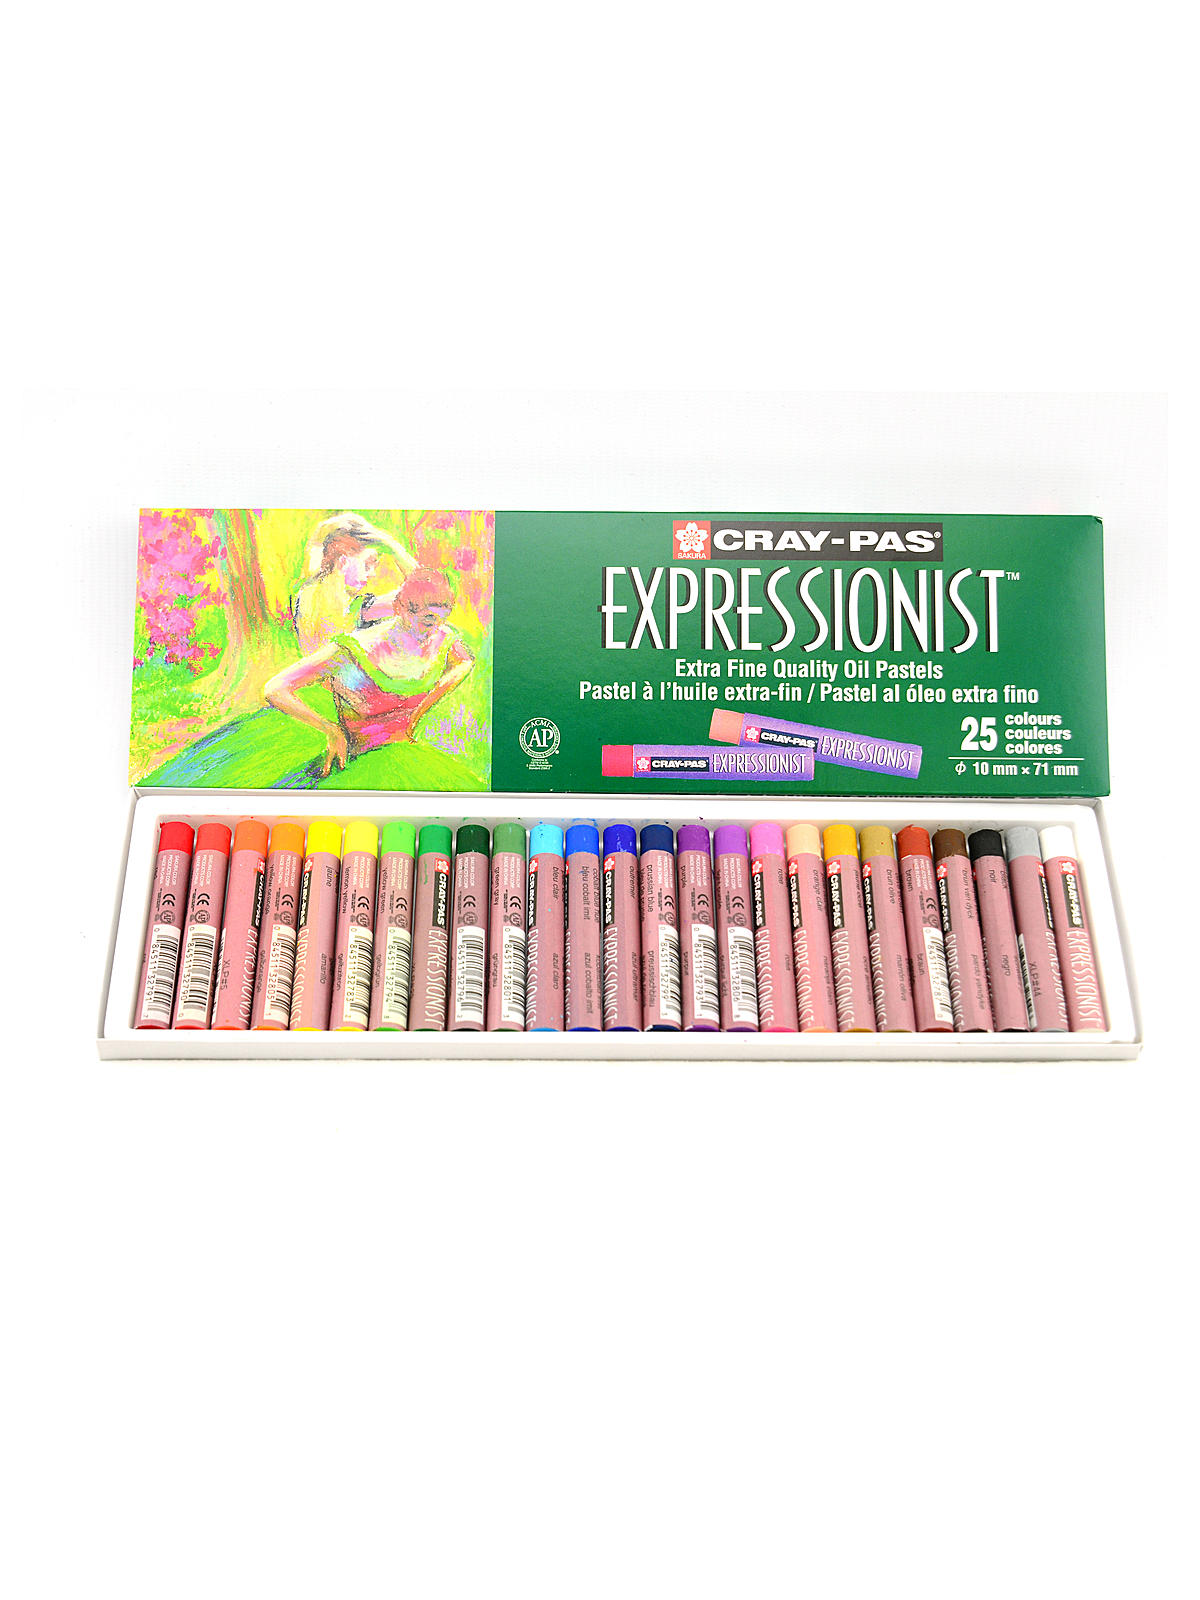 Cray-pas Expressionist Oil Pastels Assortment Set Of 25